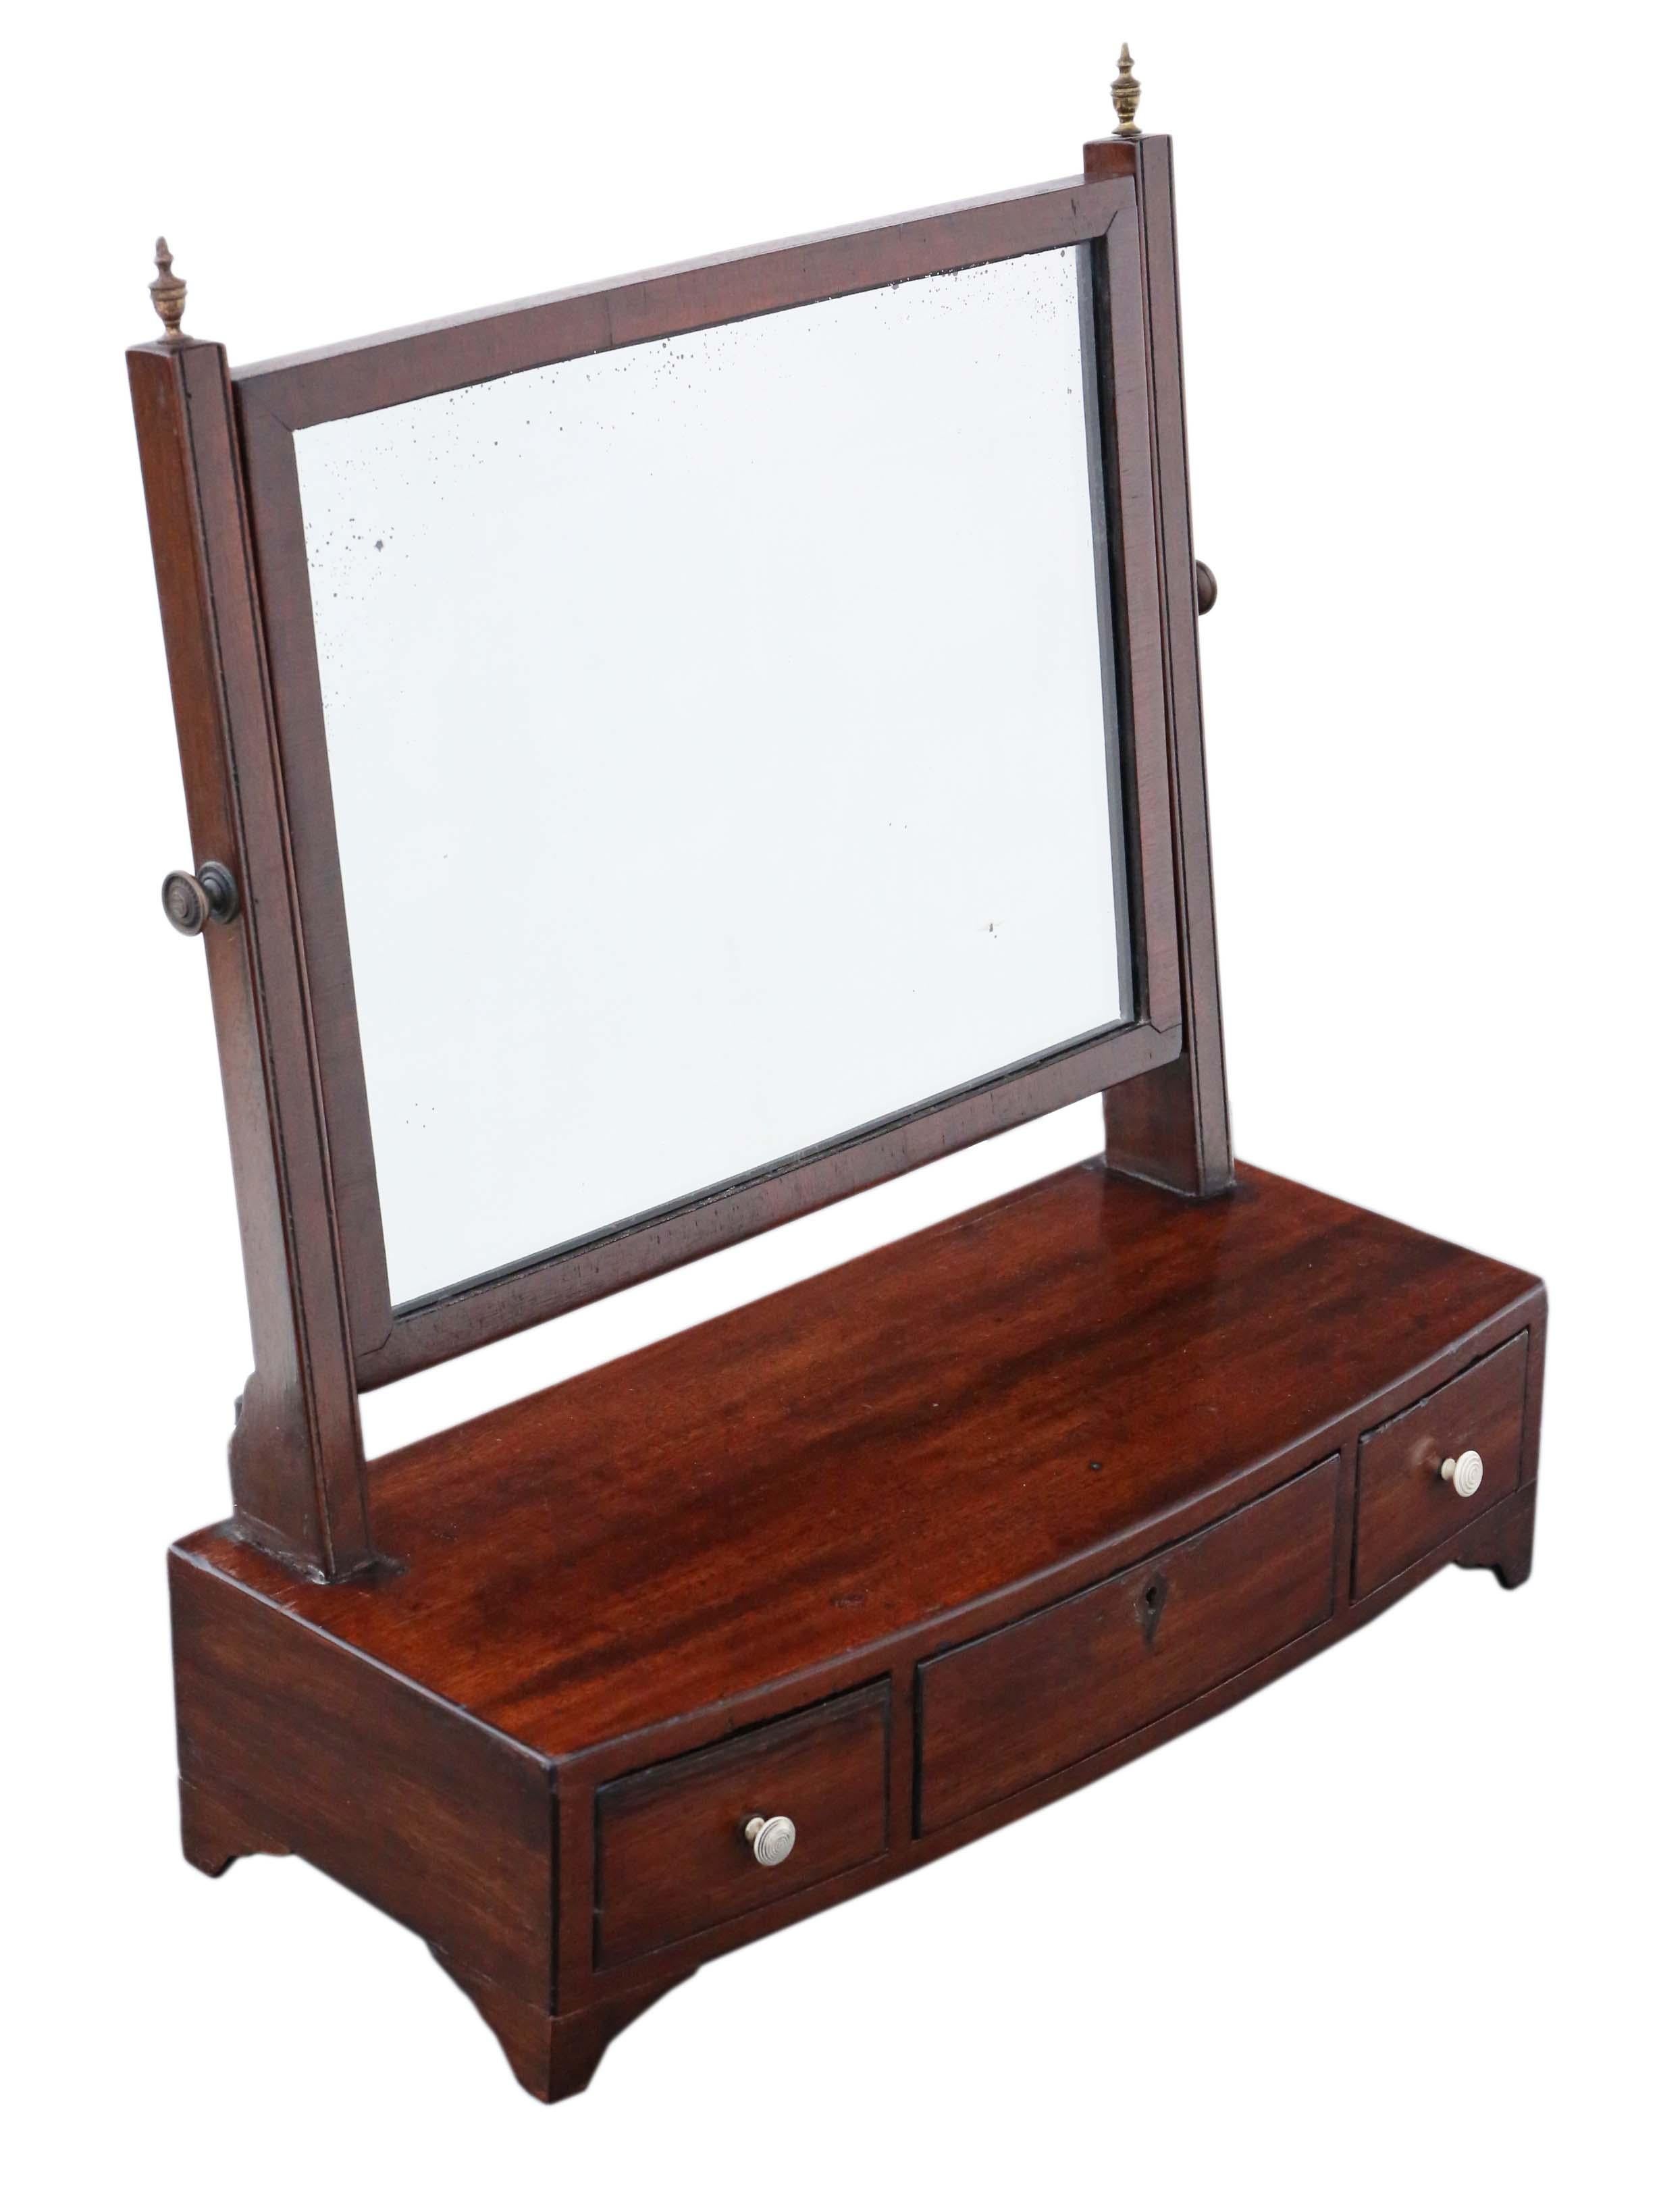 Antique quality Georgian circa 1805 mahogany dressing table swing or toilet mirror.

This is a lovely mirror, that is full of age and charm, with great proportions.

No loose joints and no woodworm.

A rare find, far better quality than most,